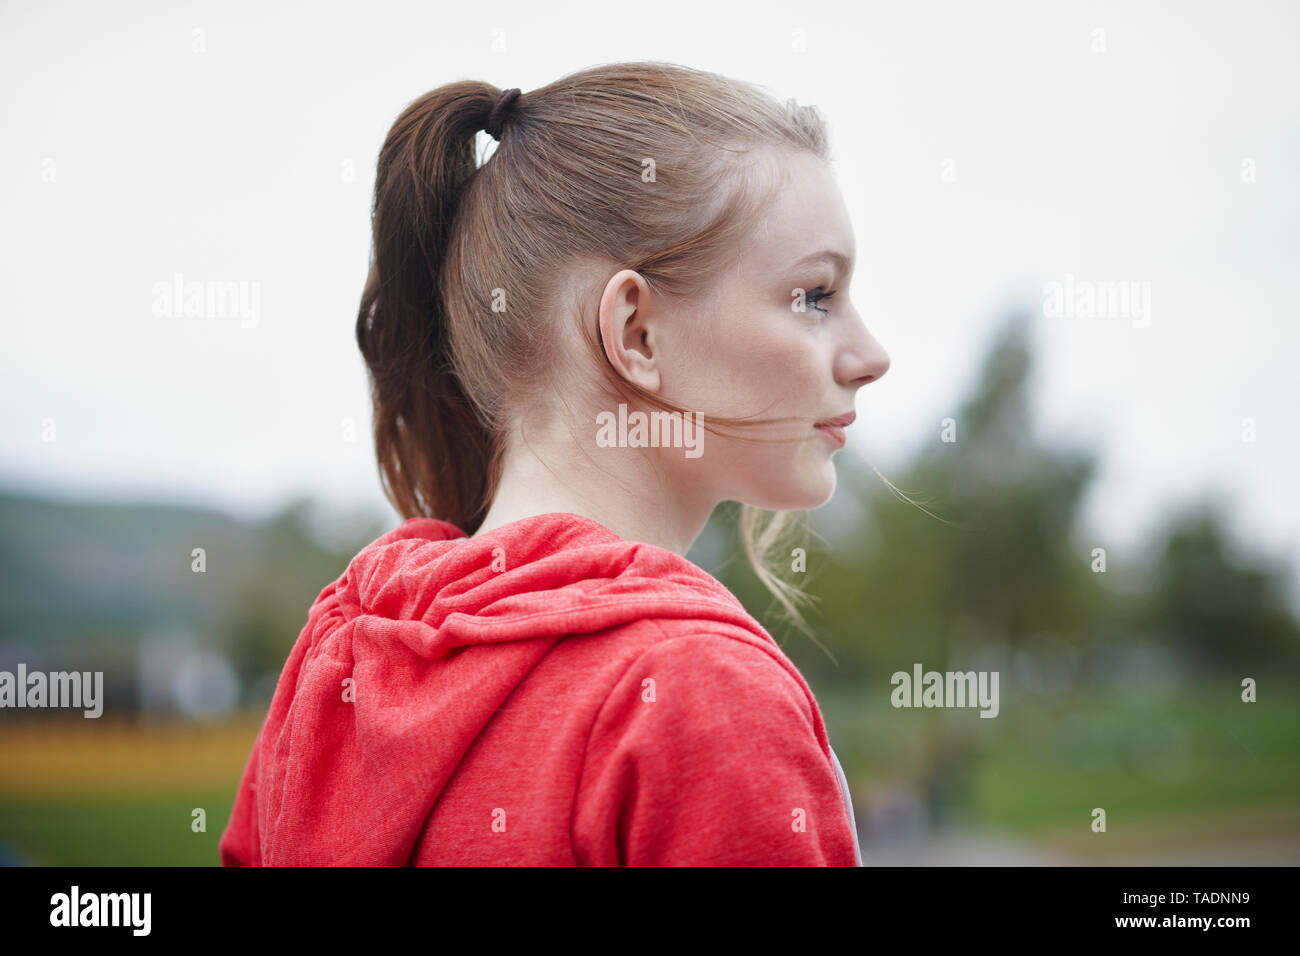 Profile of teenage girl with pigtail Stock Photo